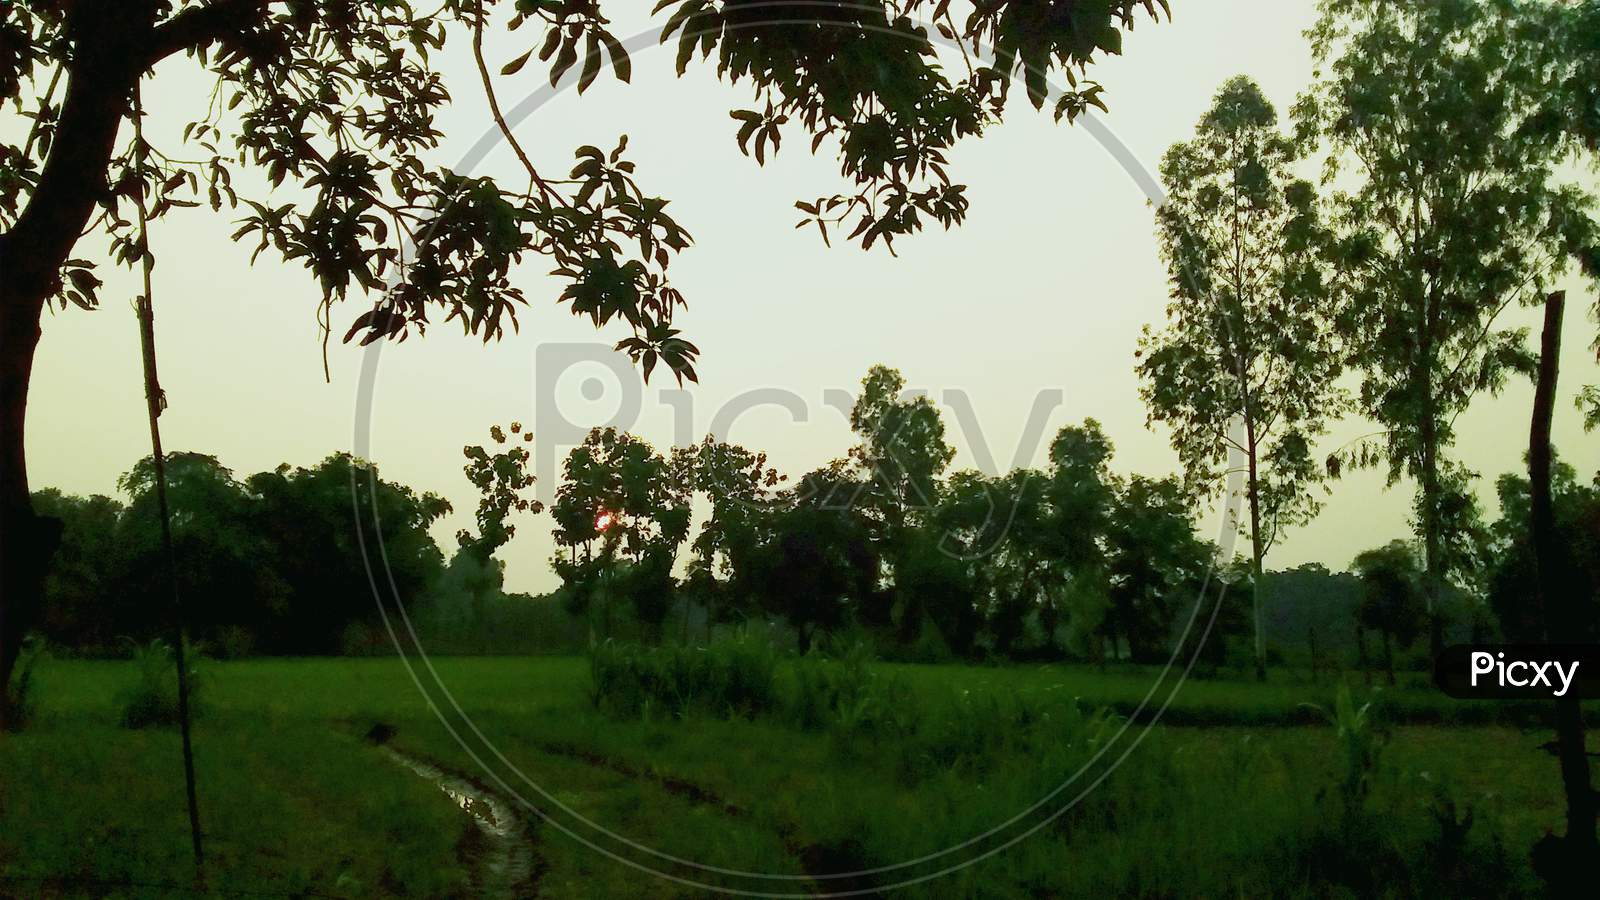 Natural Environment in Land Lot Grassland & Tree Picture From North India Uttar Pradesh